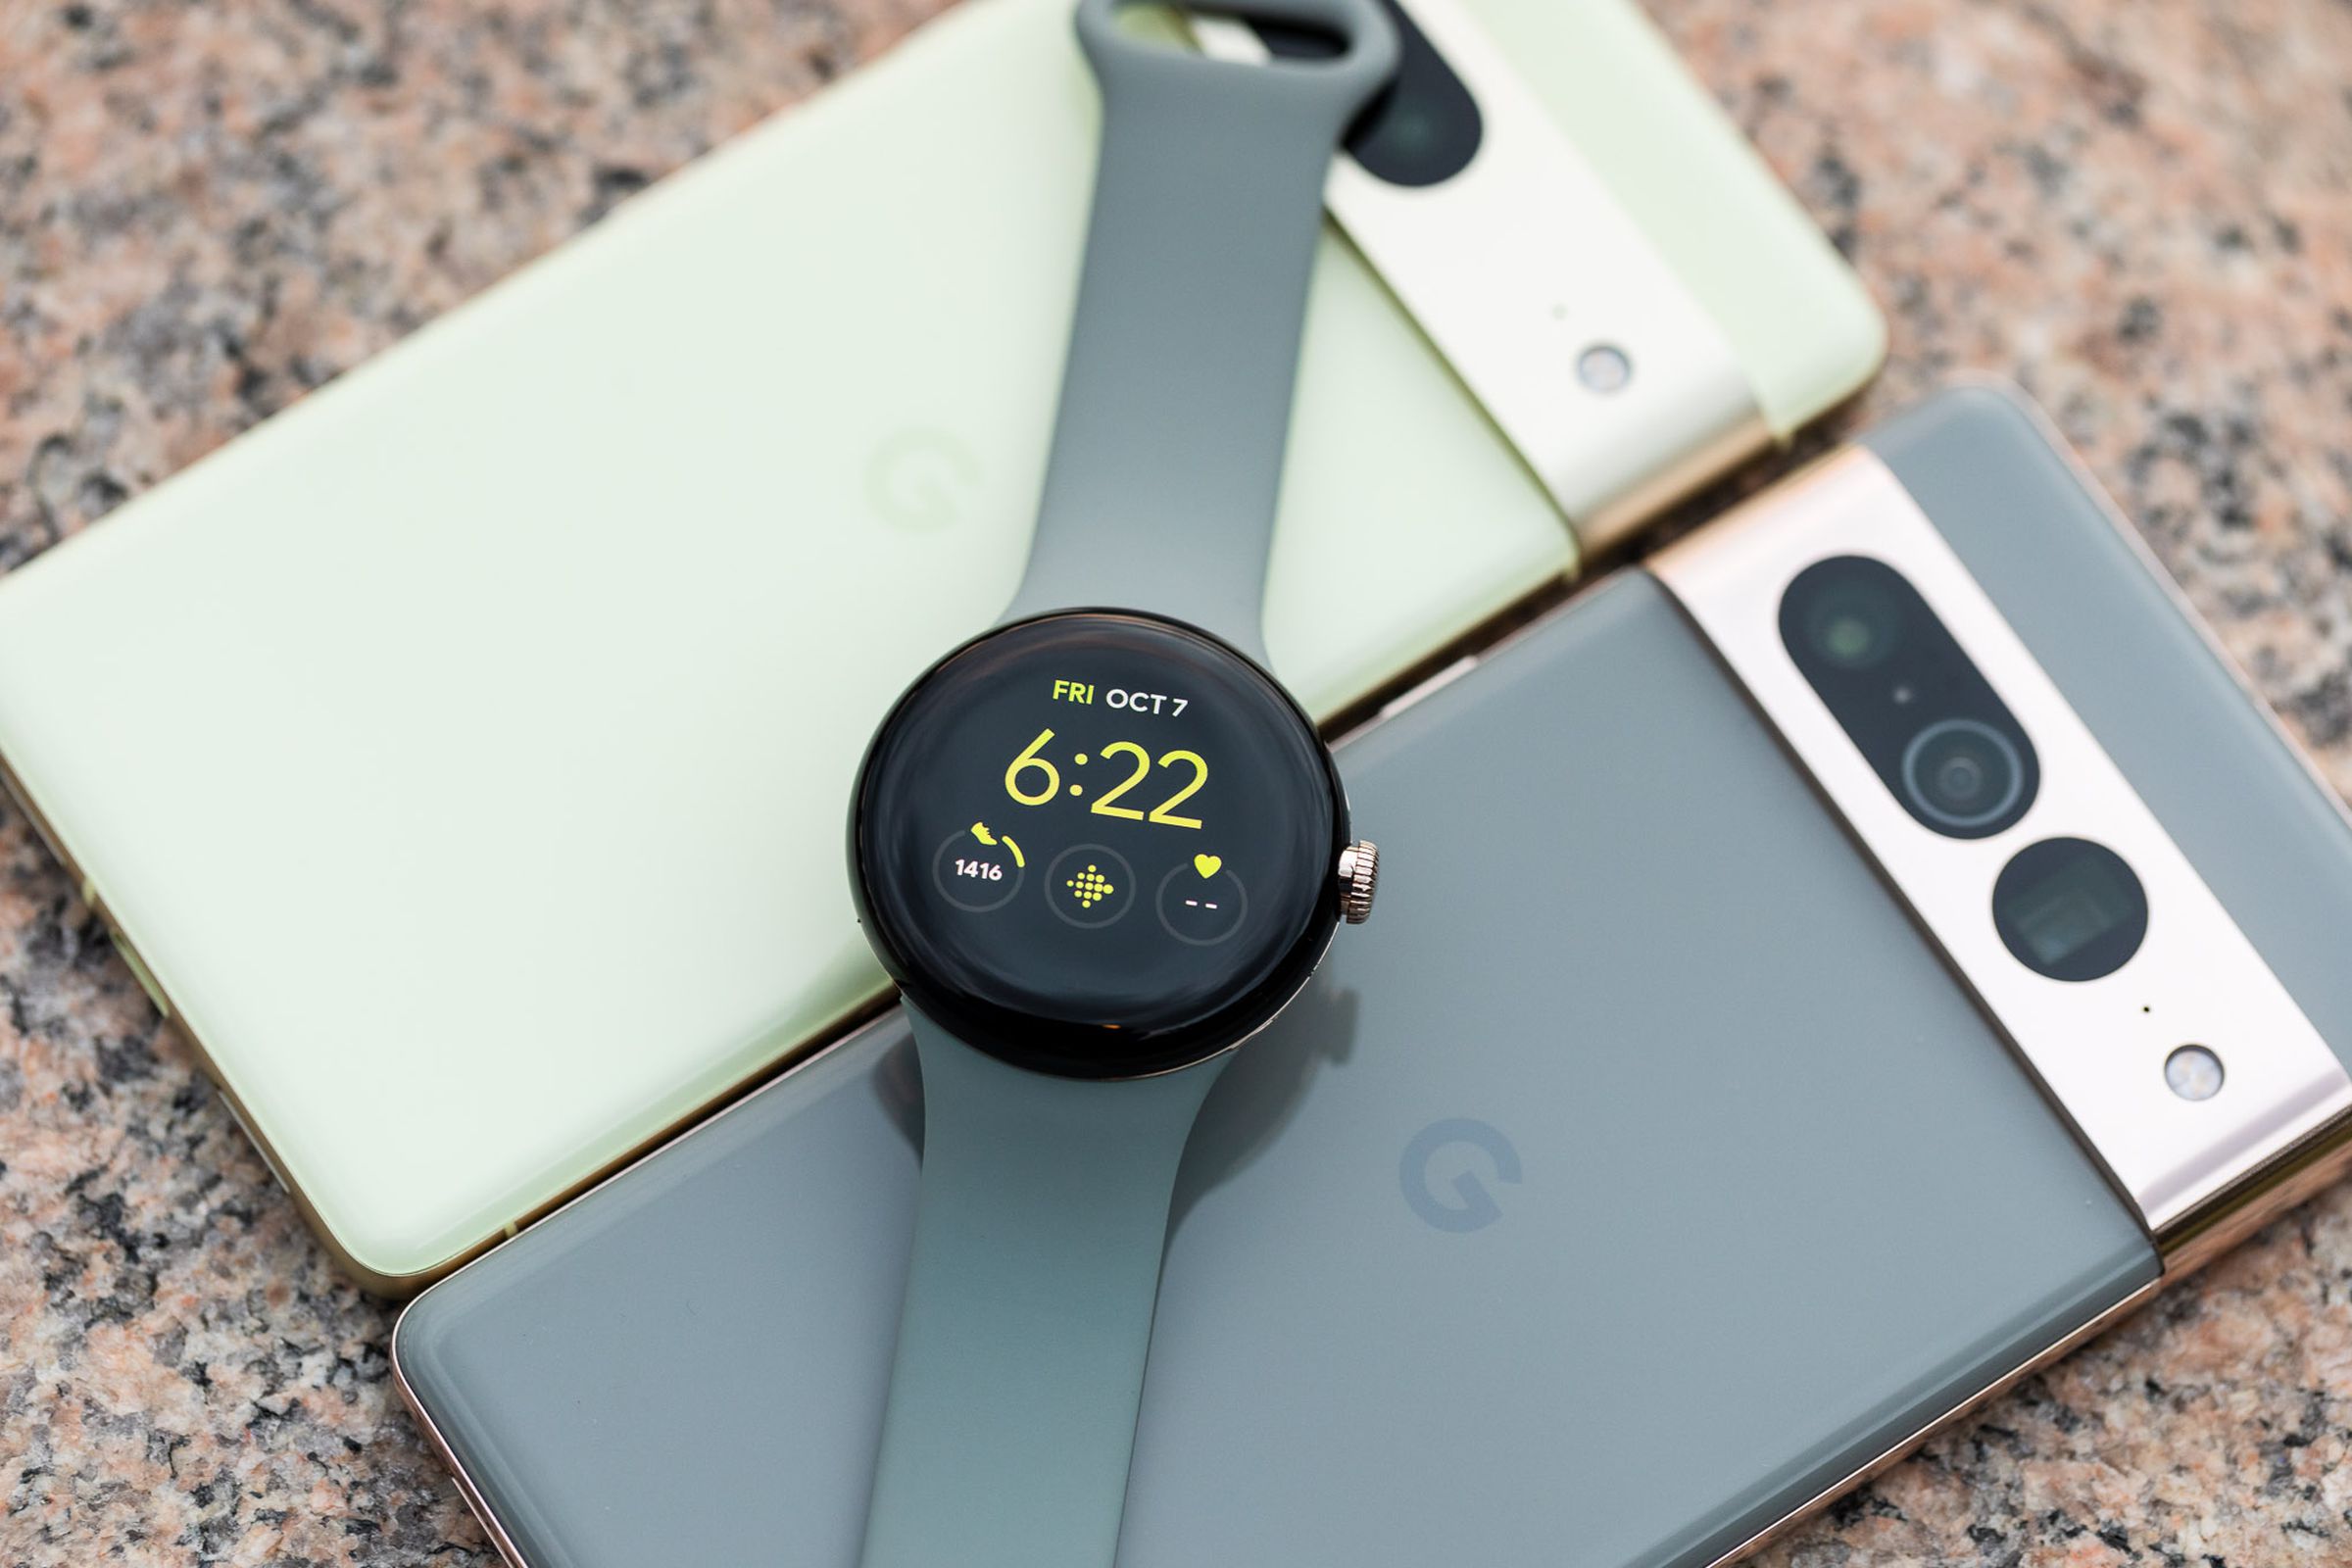 Pixel Watch on top of a Pixel 7 and Pixel 7 Pro